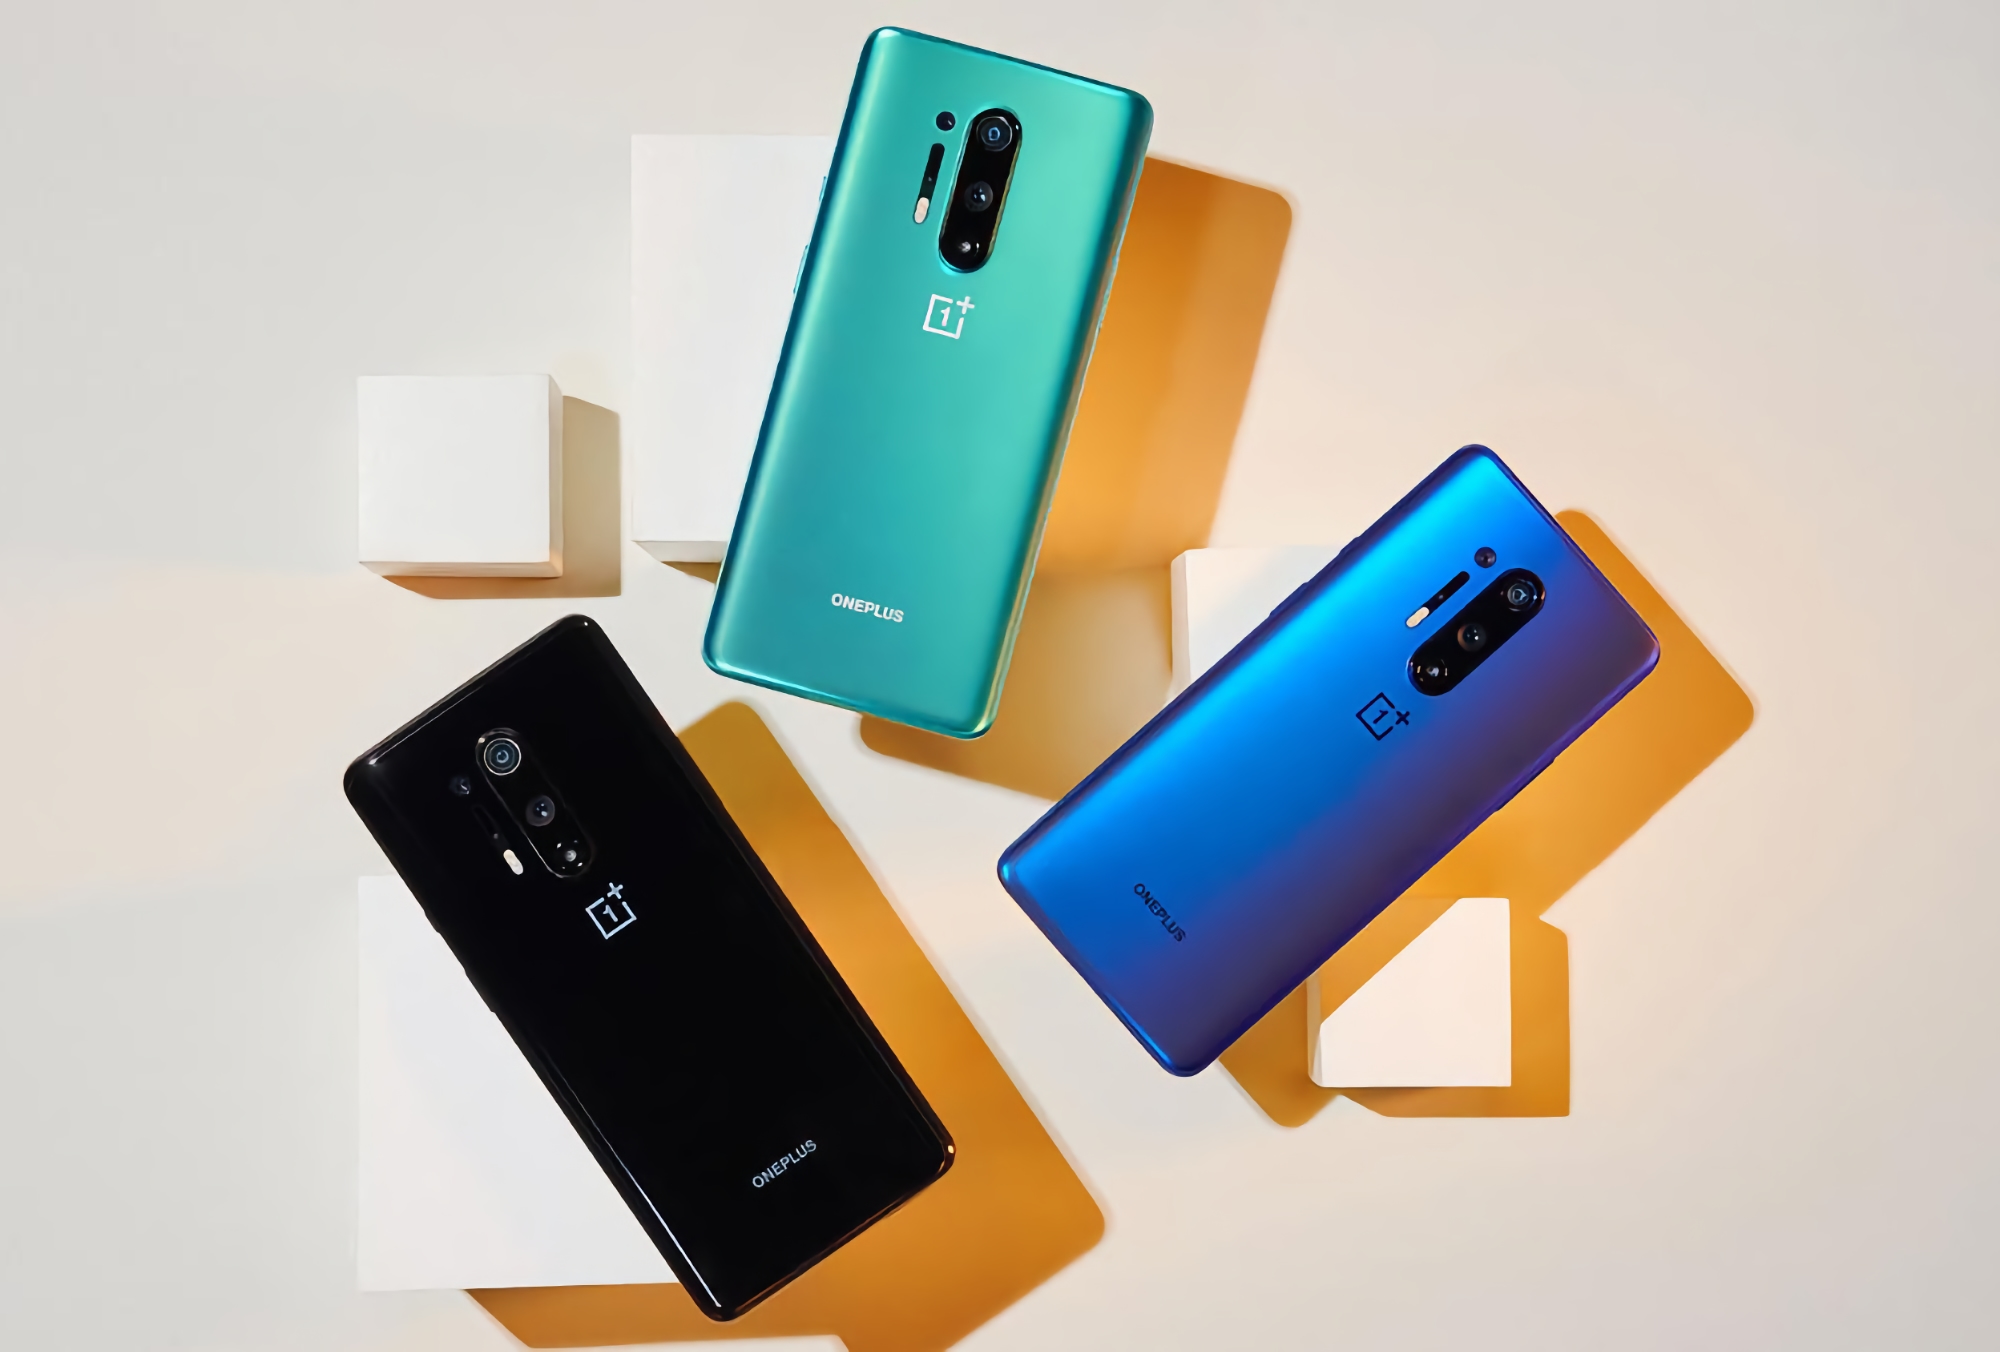 OnePlus 8, OnePlus 8 Pro, OnePlus 8T and OnePlus Ace received a beta version of ColorOS 13